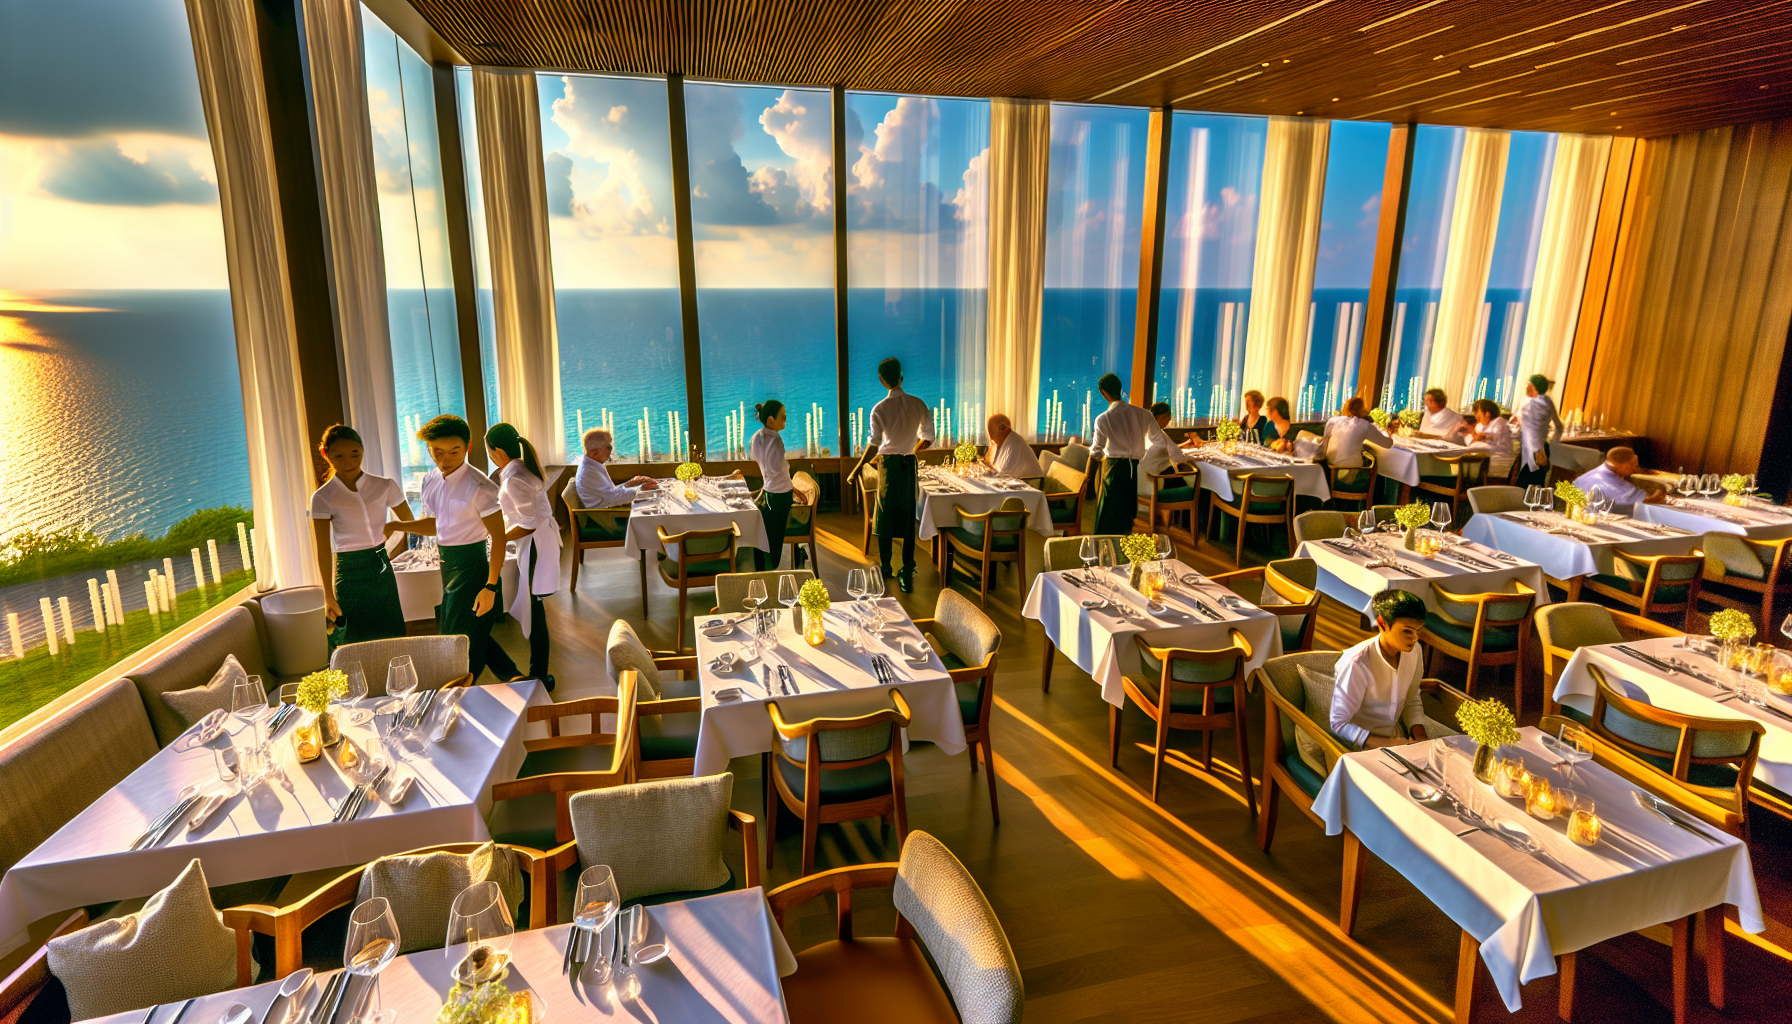 Full-service dining with ocean views